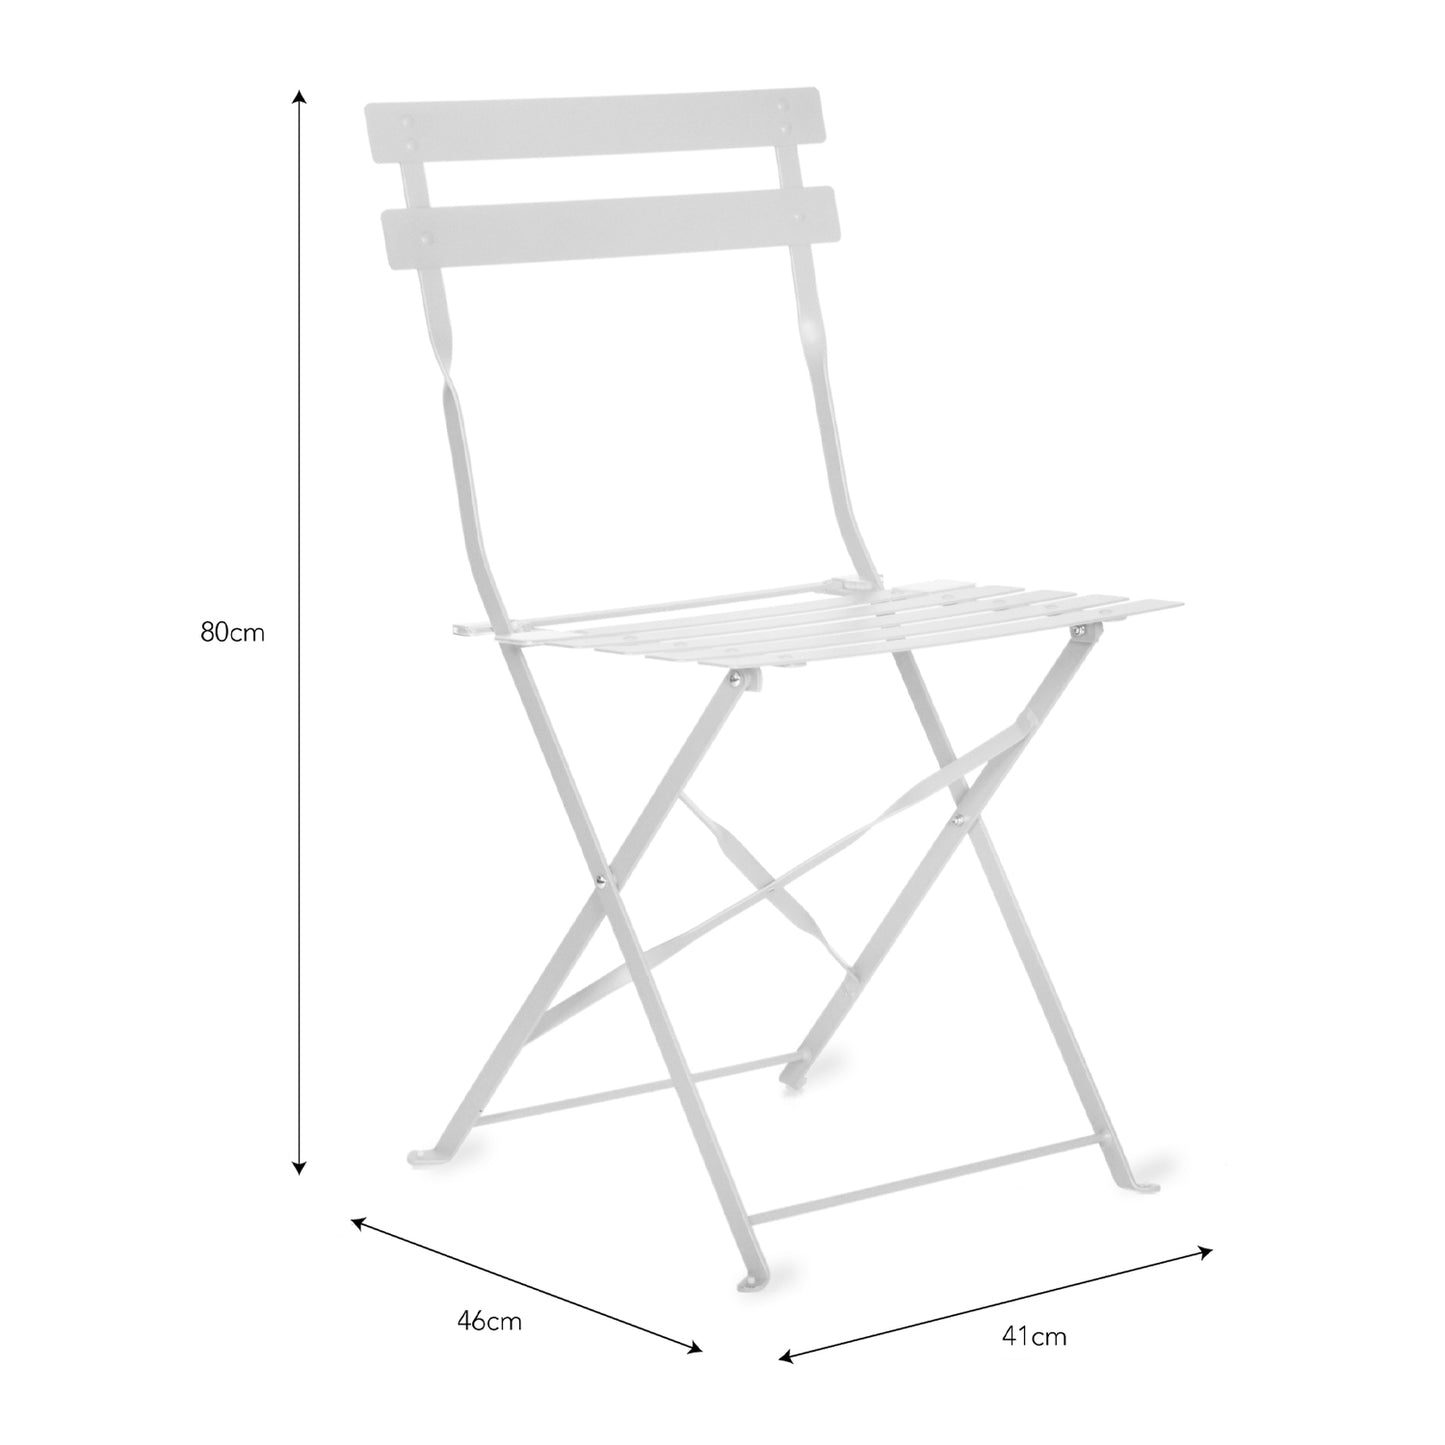 Pair of Bistro Outdoor Chairs in Chalk Steel by Garden Trading